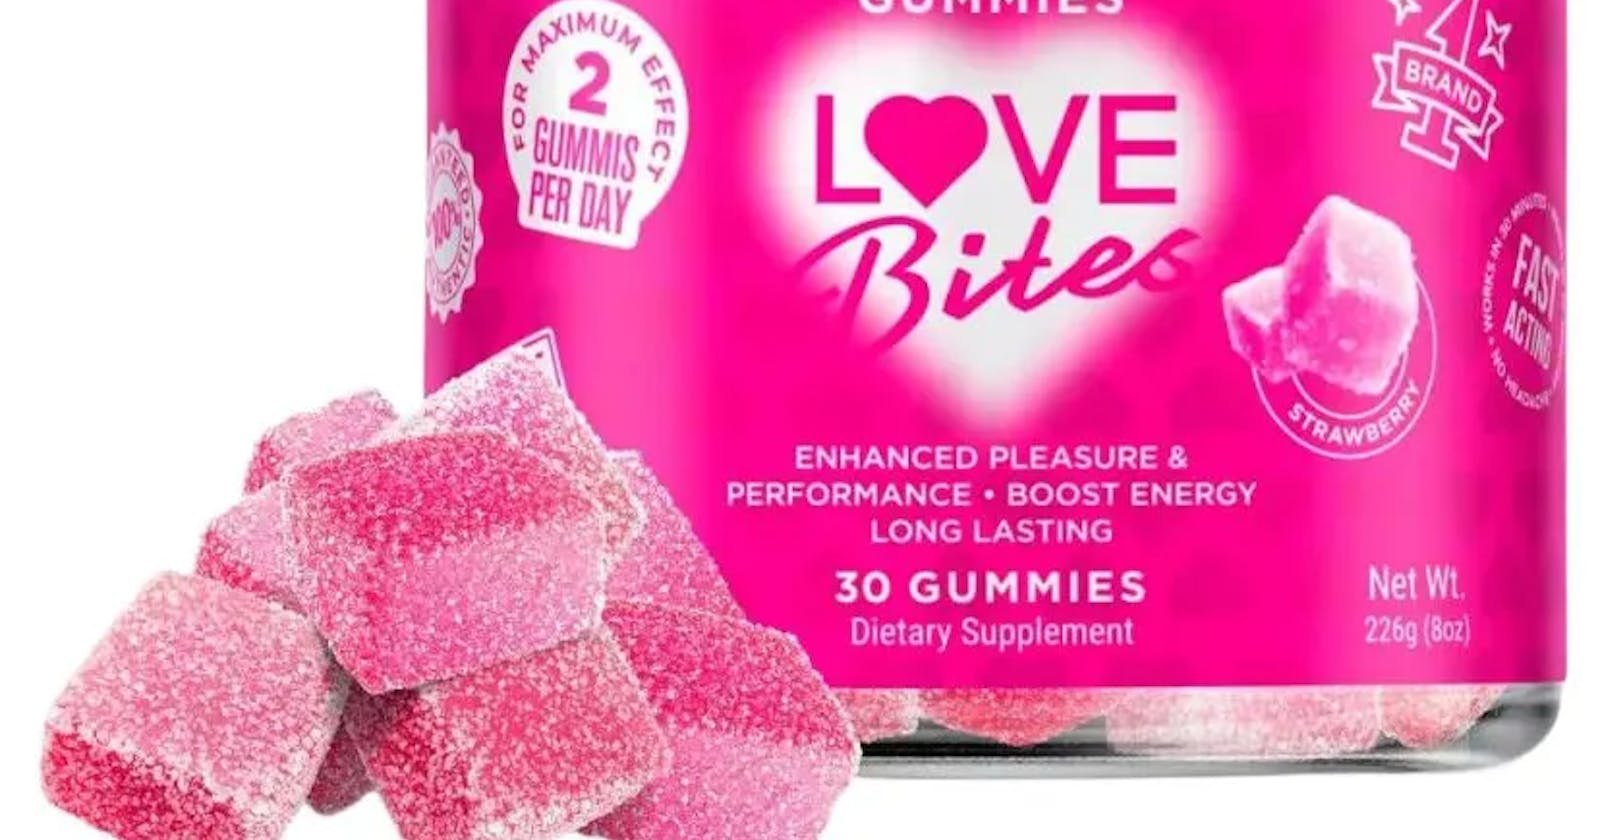 Love Bites Female Sensual Gummies - Does It Really Work ? Here's My Results Using It!